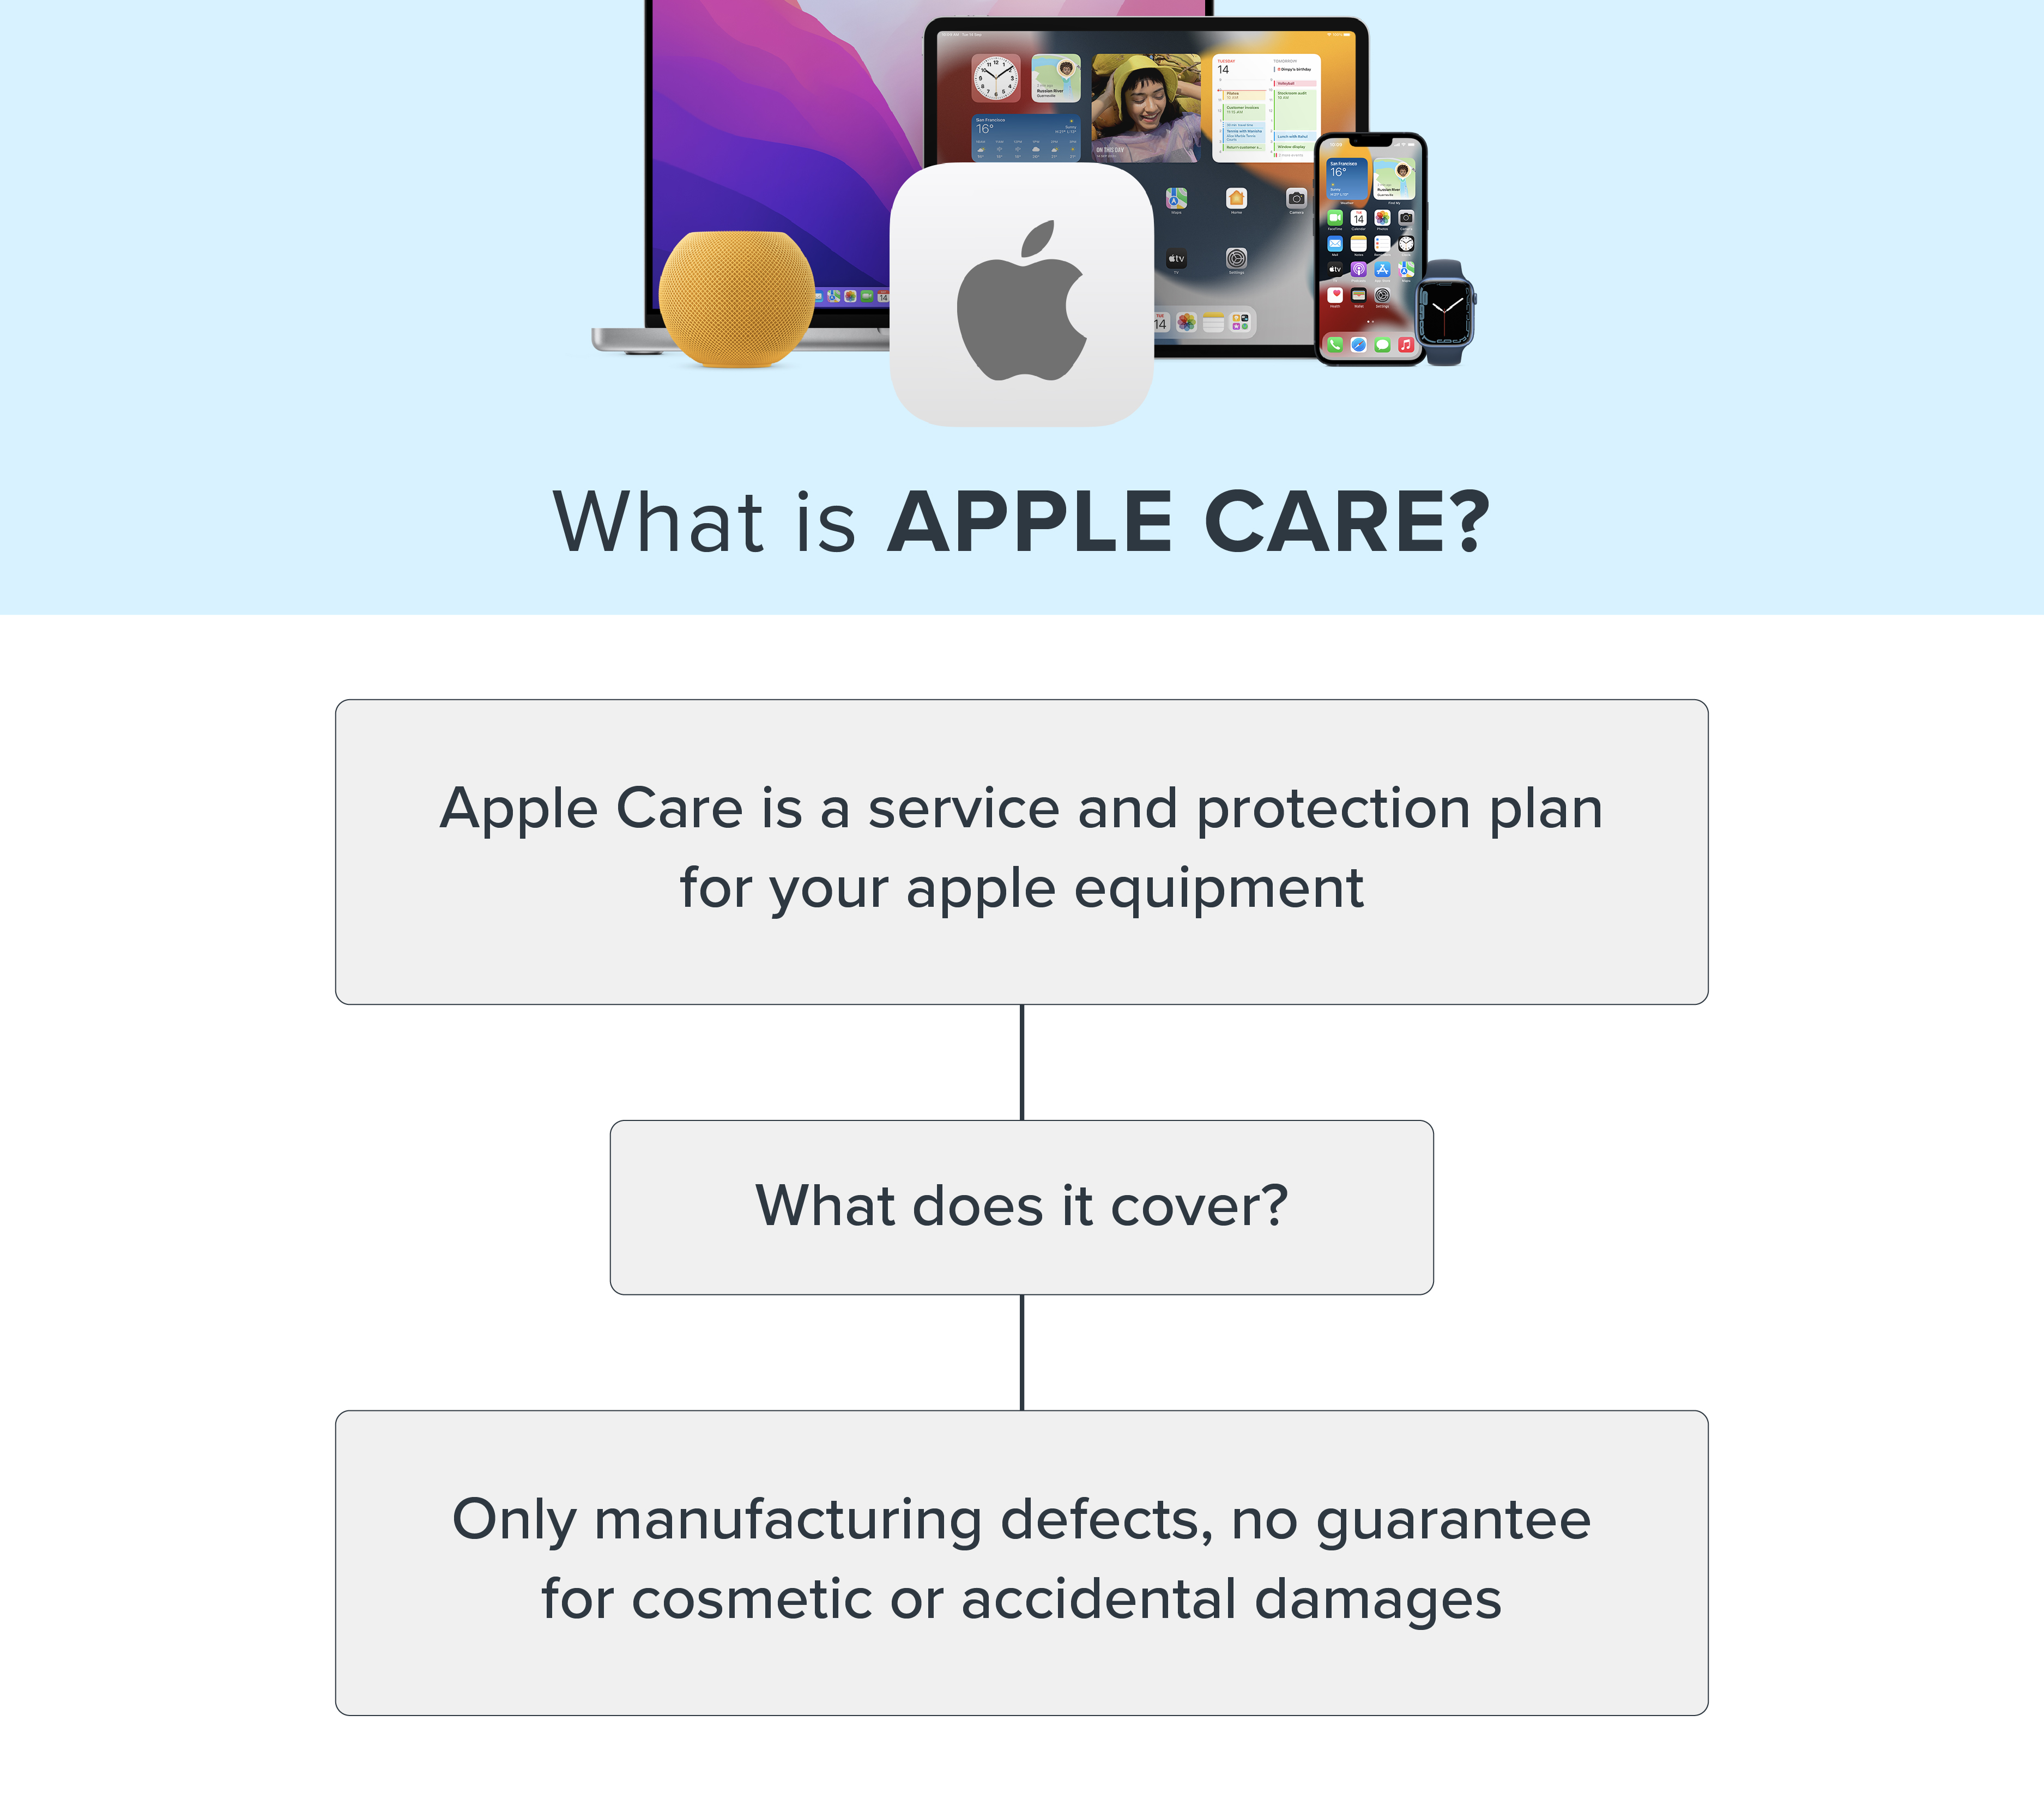 A visual representation of Apple Care and damages it covers.